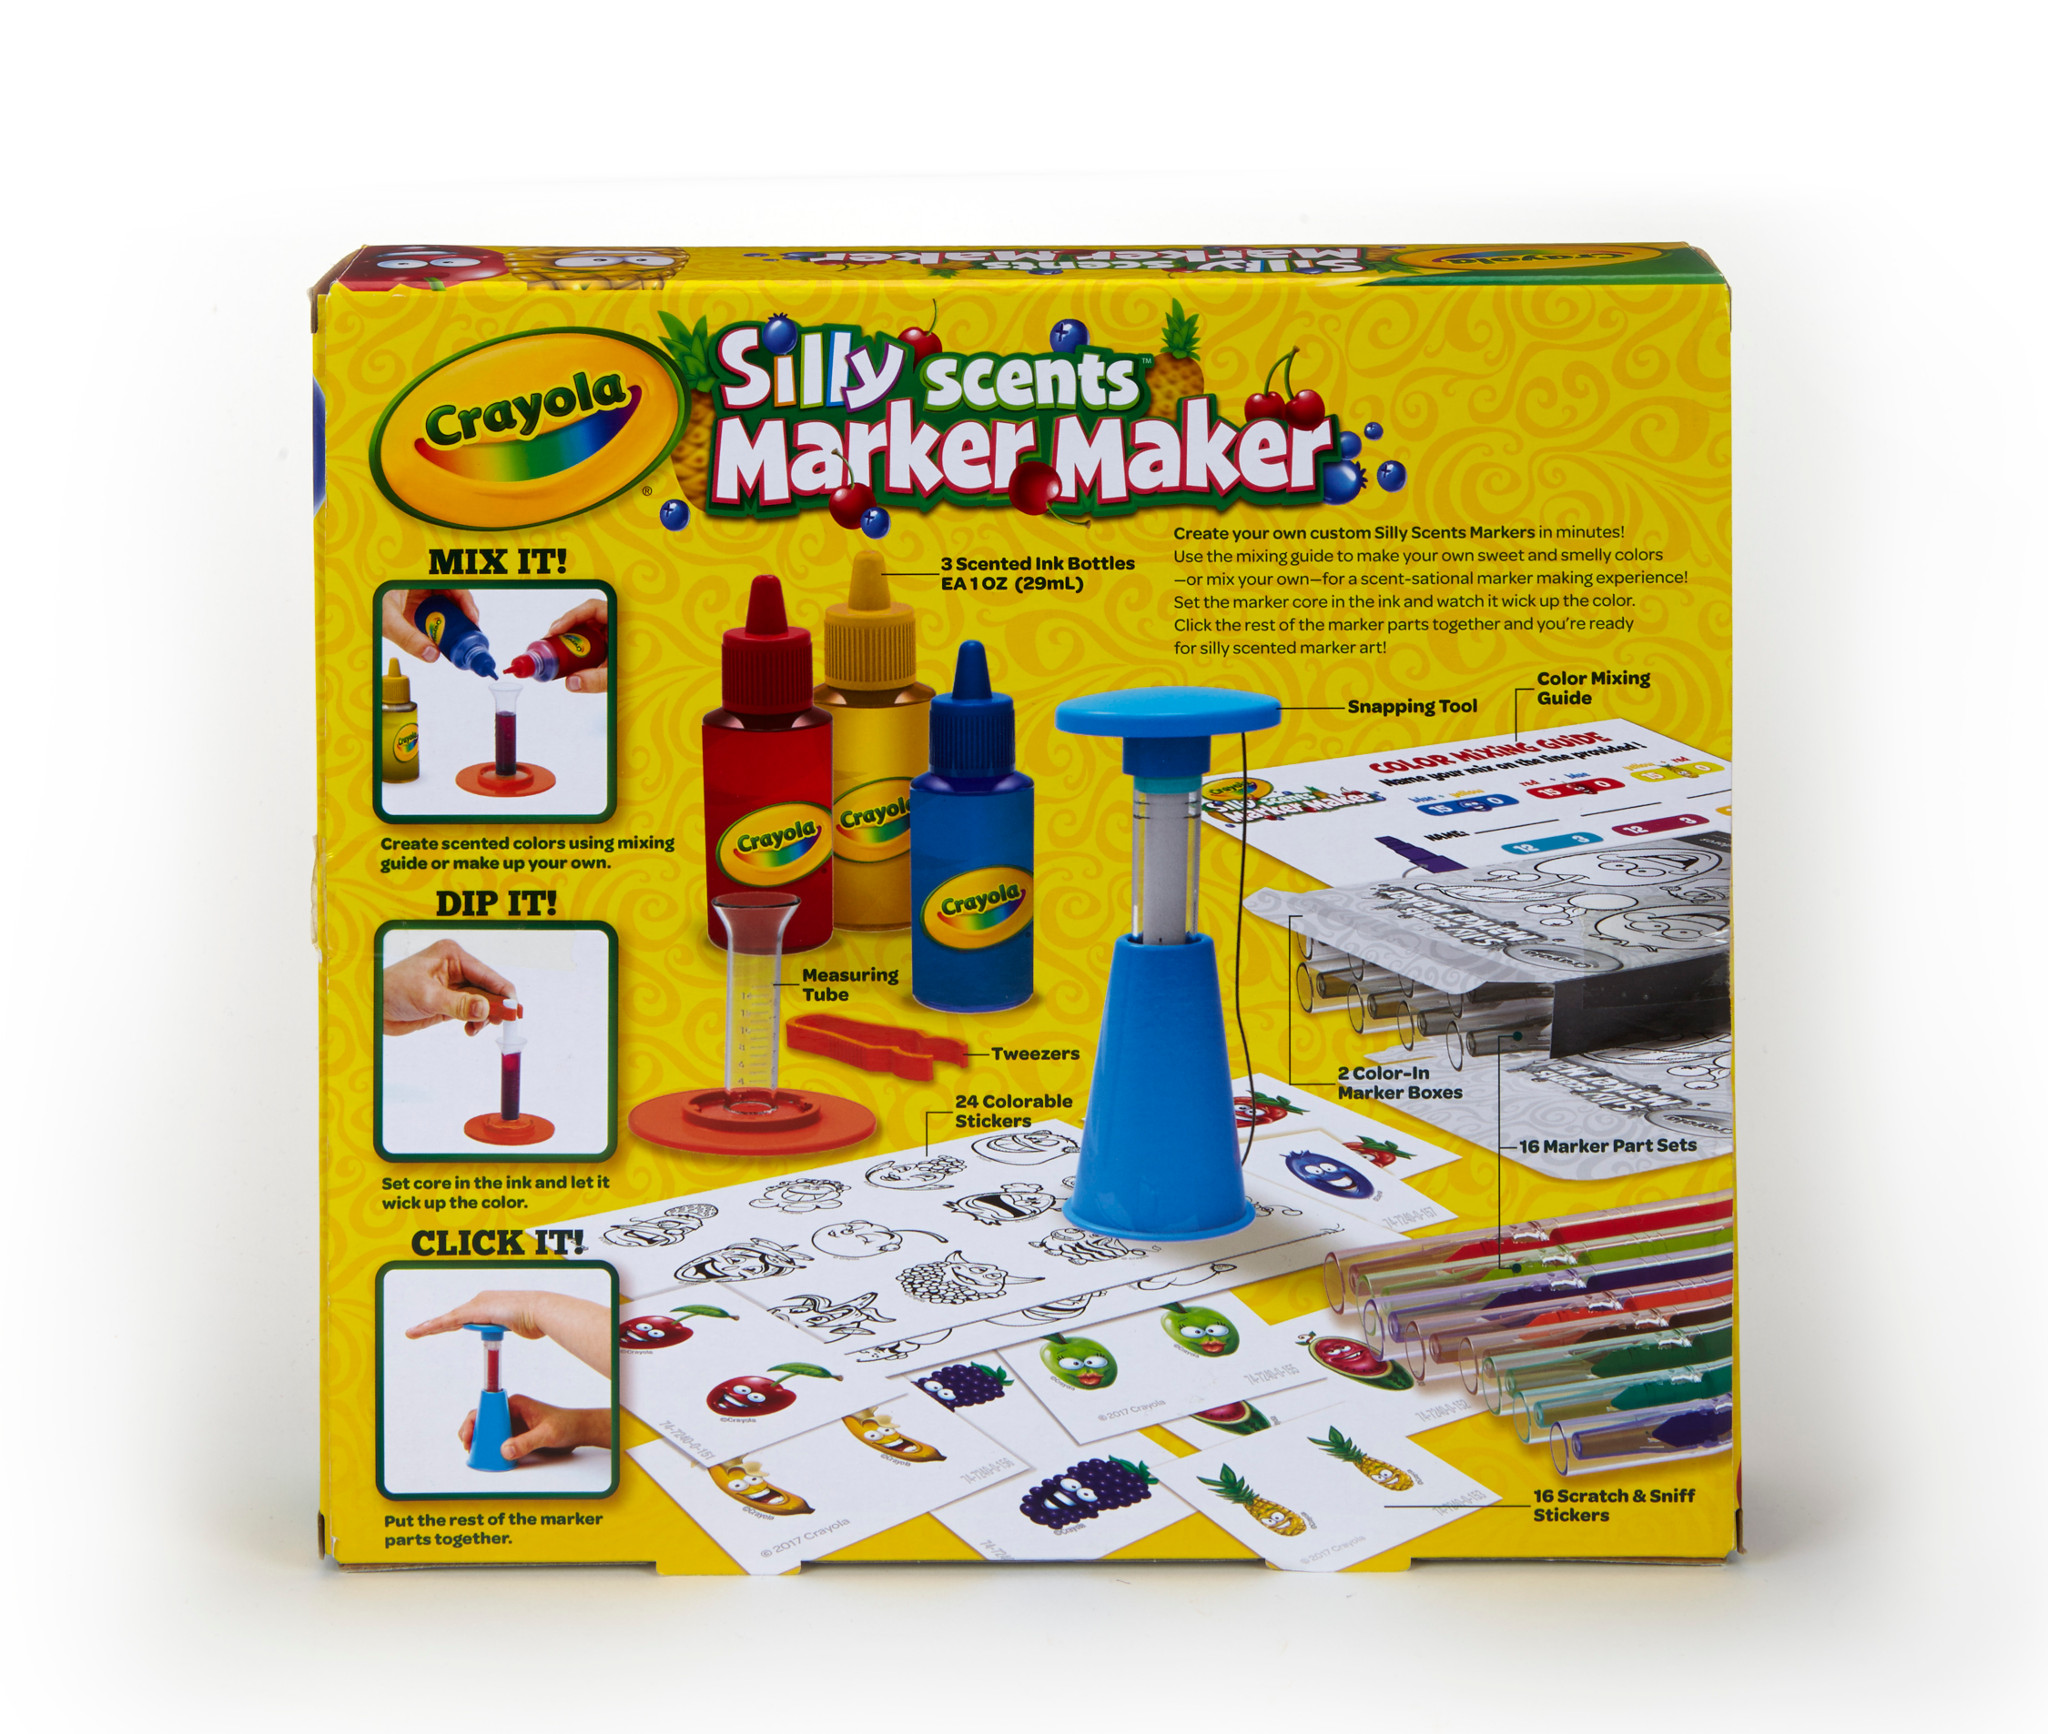 Crayola Silly Scents Marker Maker Kit - image 2 of 11